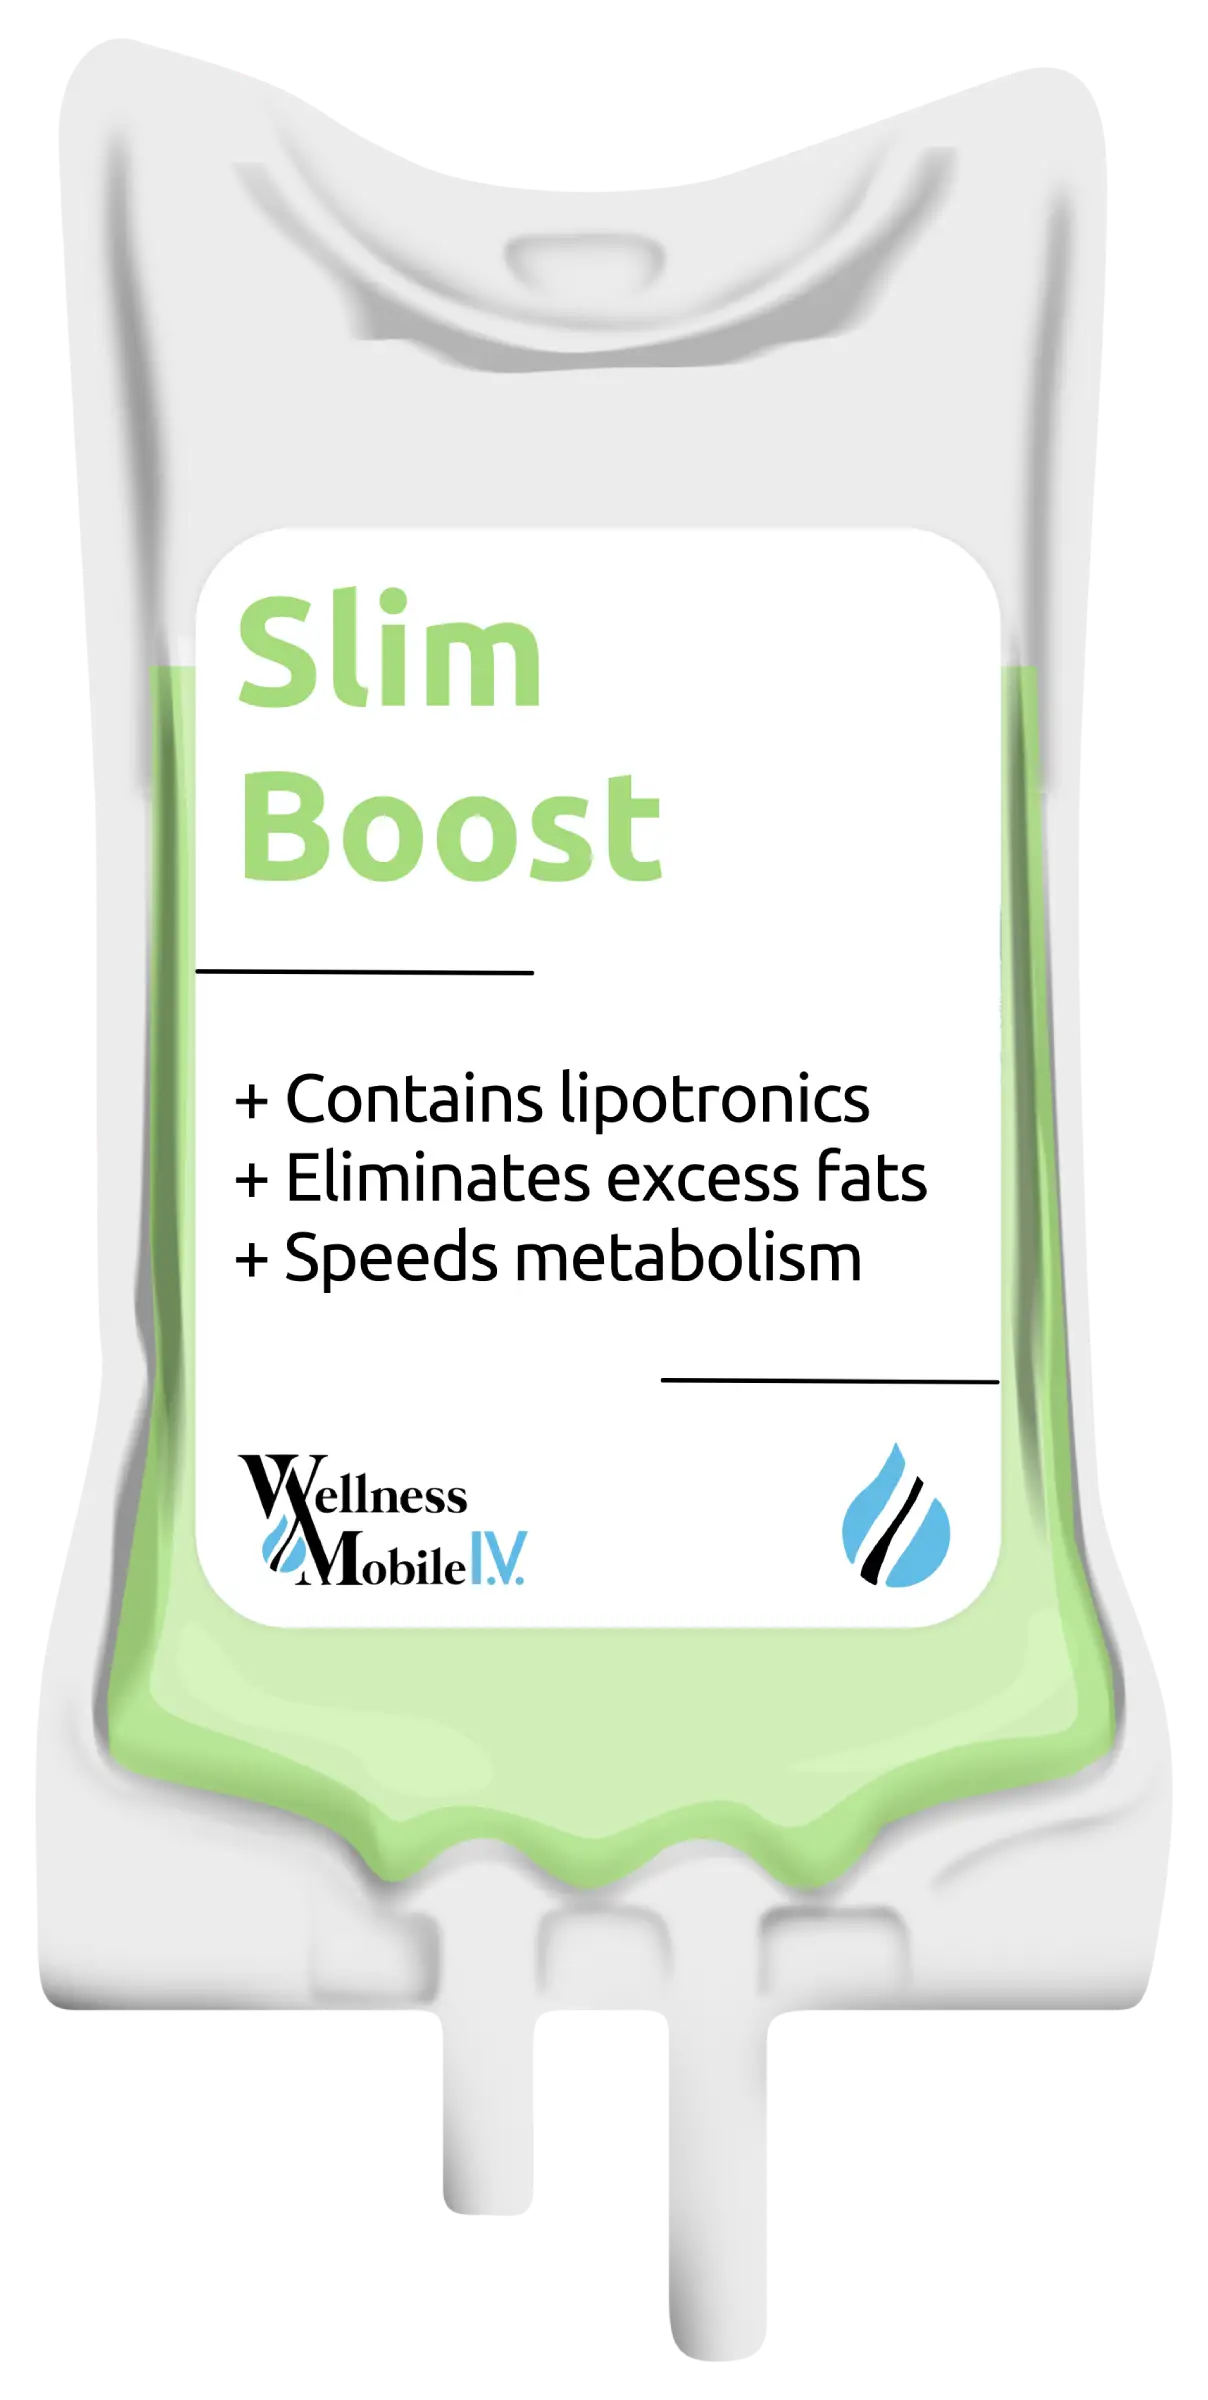 Slim Boost - IV Therapy & Wellness Services: Worldwide Wellness